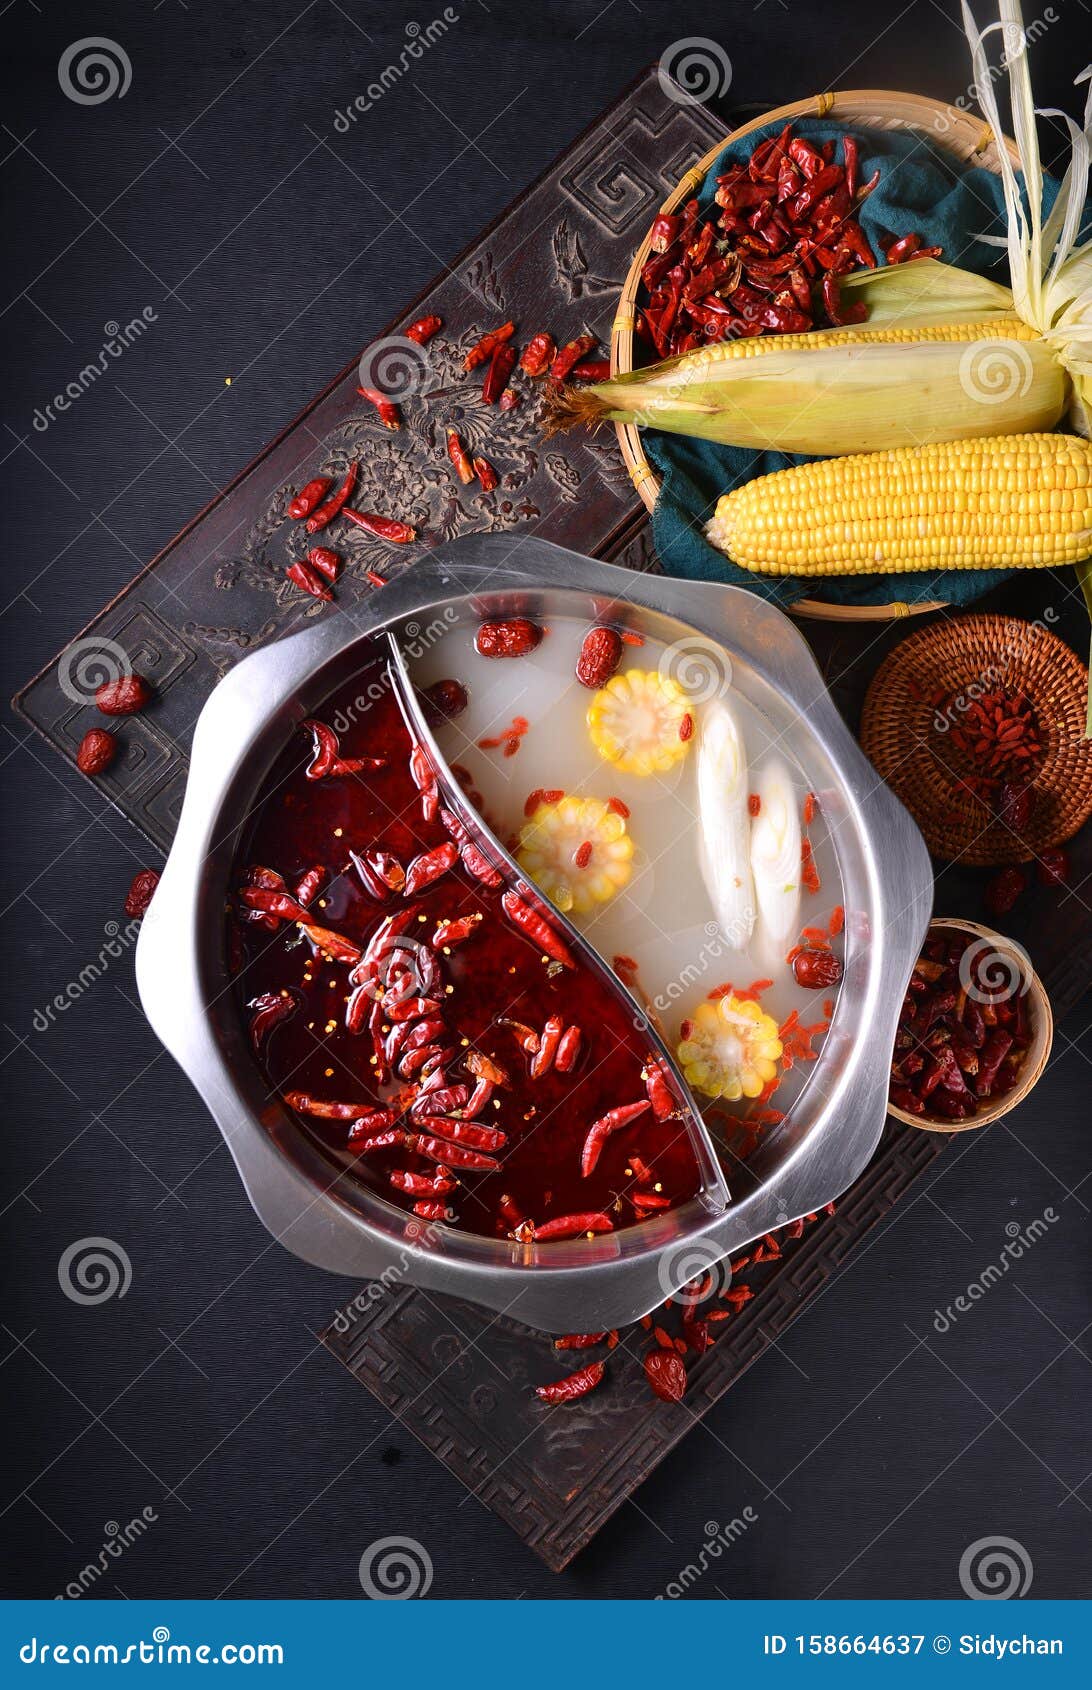 Sichuan Spicy Hot Pot Cuisine and Ingredients Stock Image - Image of ...